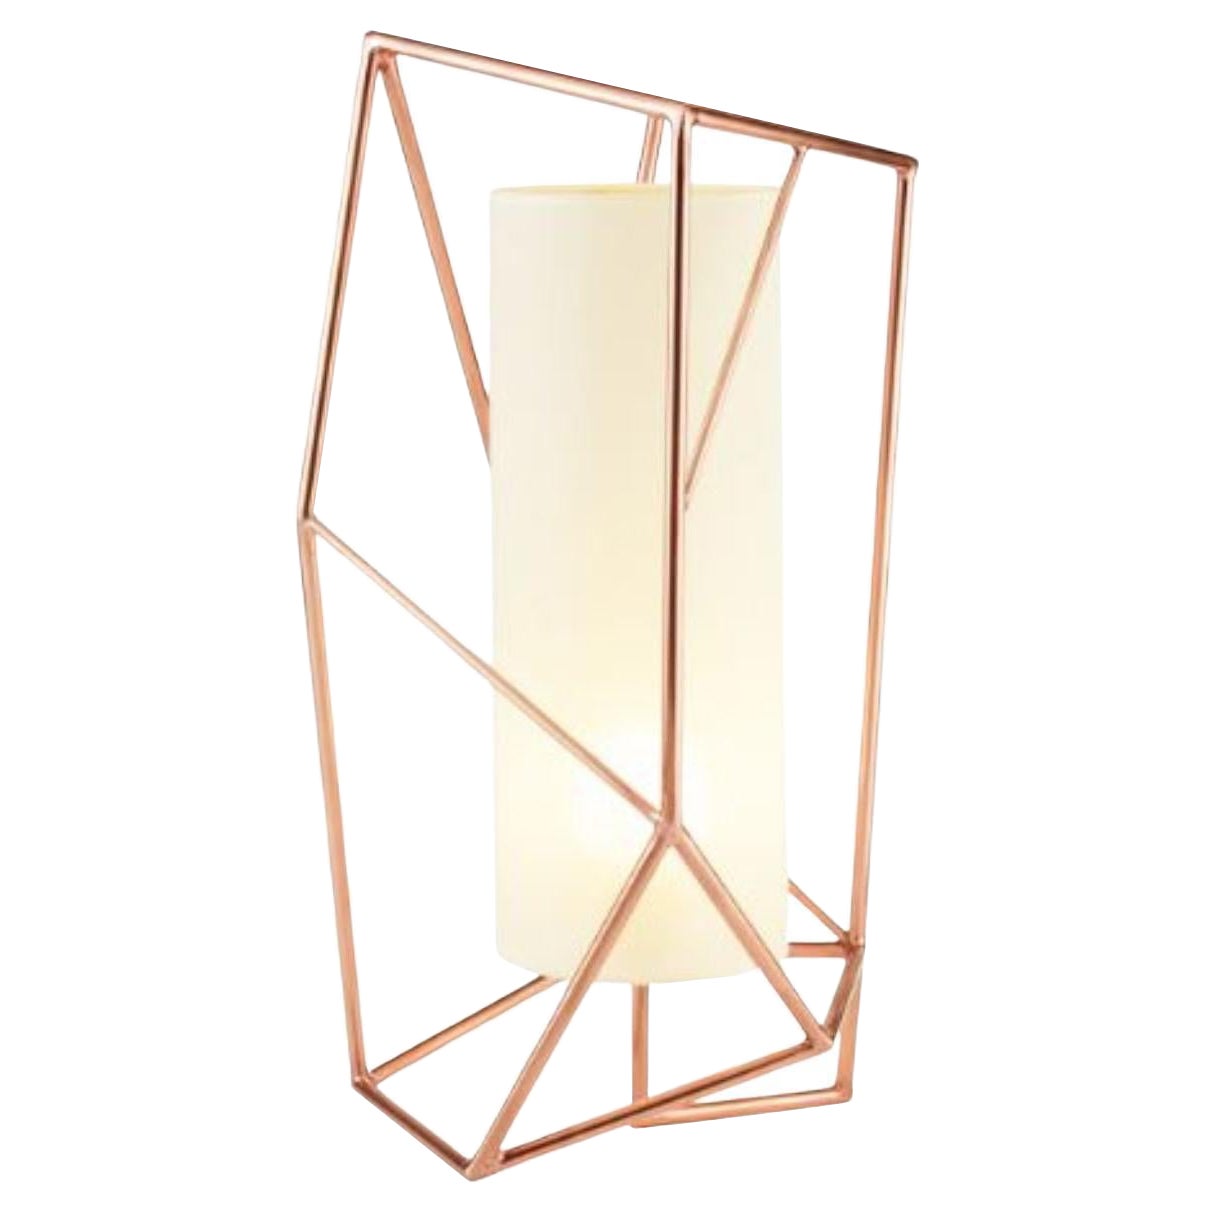 Copper Star Table Lamp by Dooq